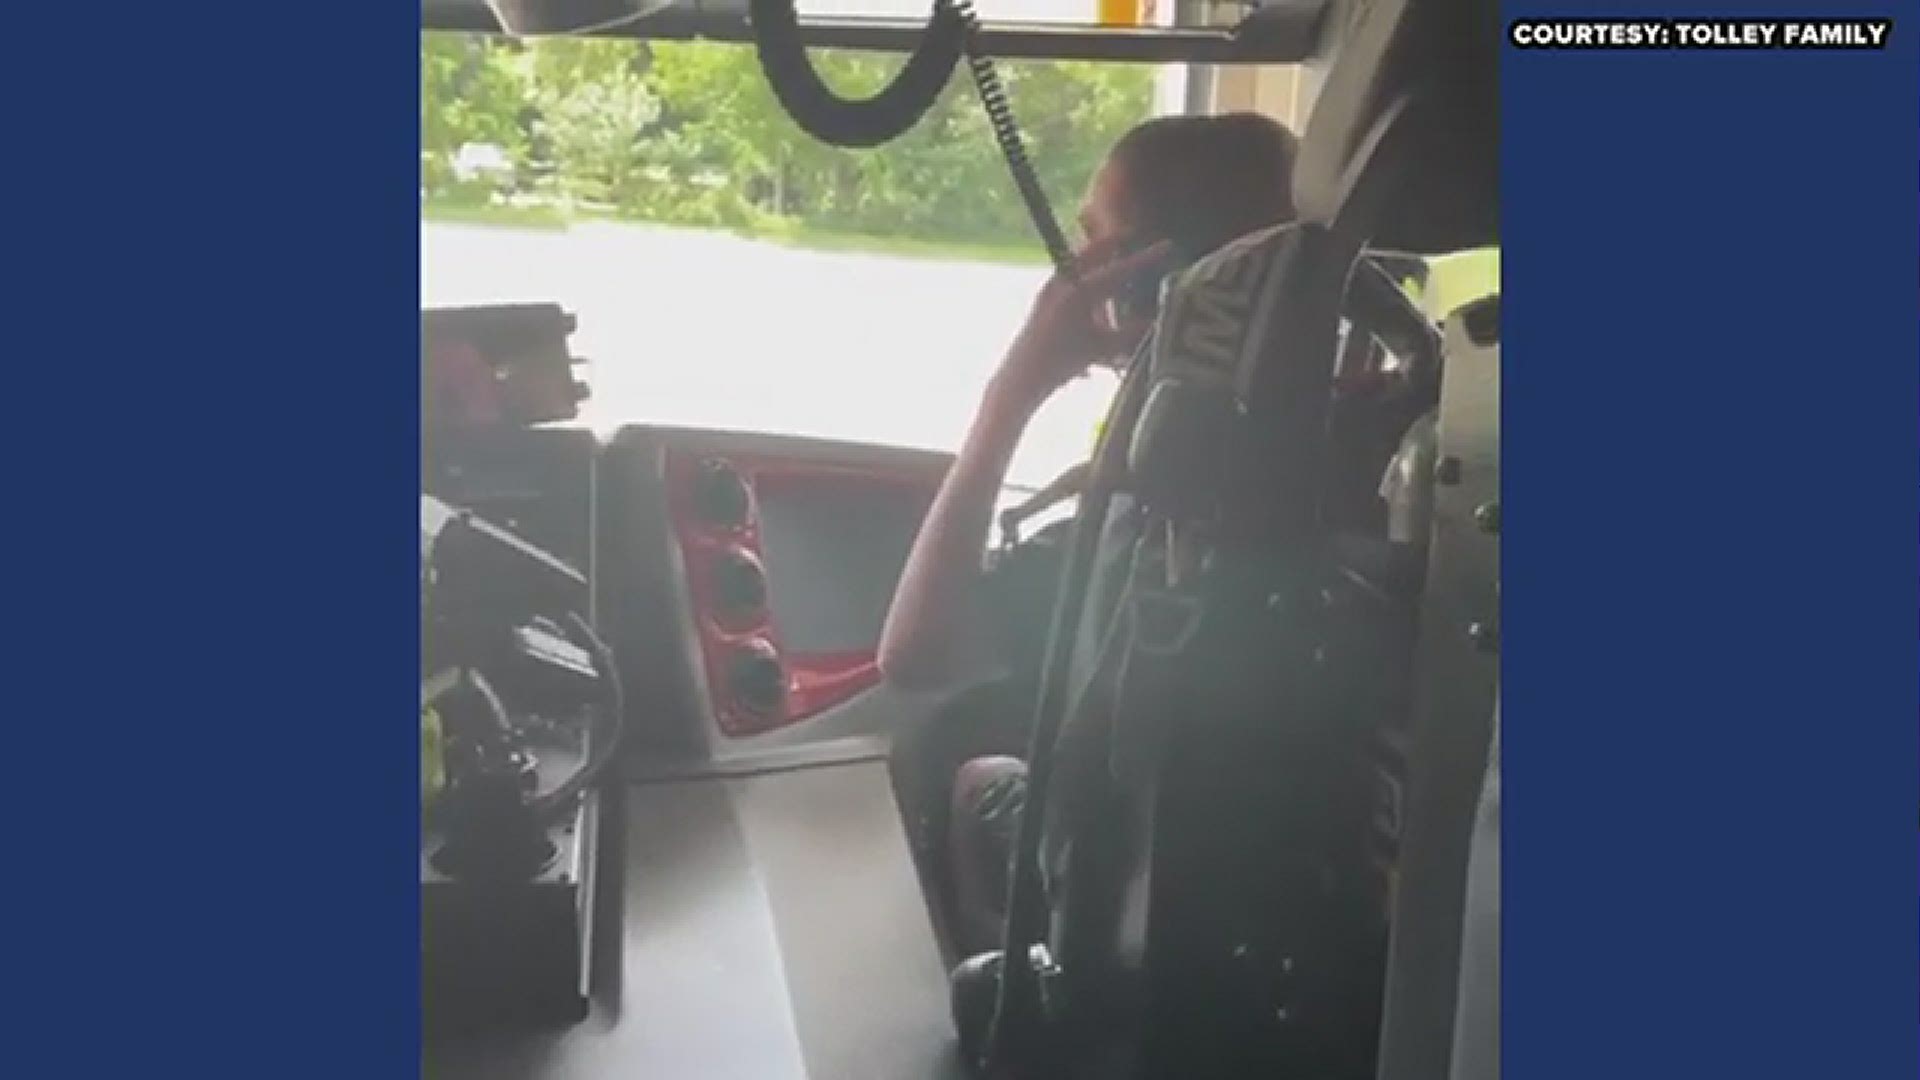 Firefighters and Chief Bowers at Alamance Fire Station 54 in Guilford County surprised Timothy with a ride in the fire truck.